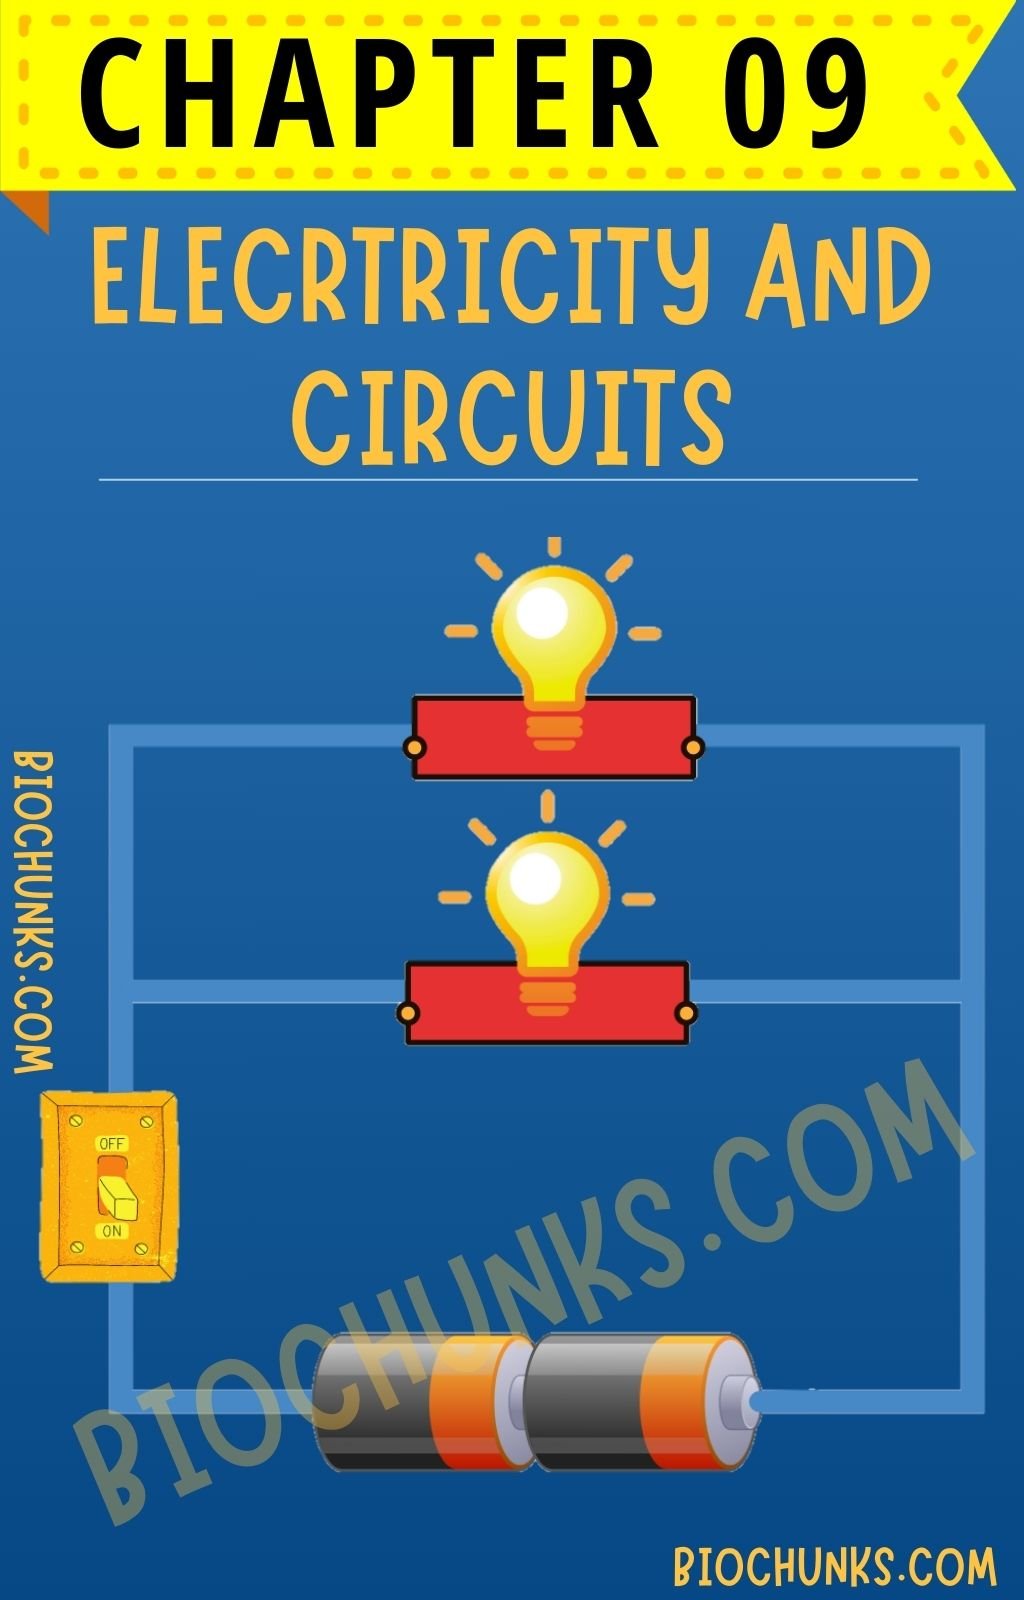 Electricity & Circuits Chapter 09 Class 6th biochunks.com